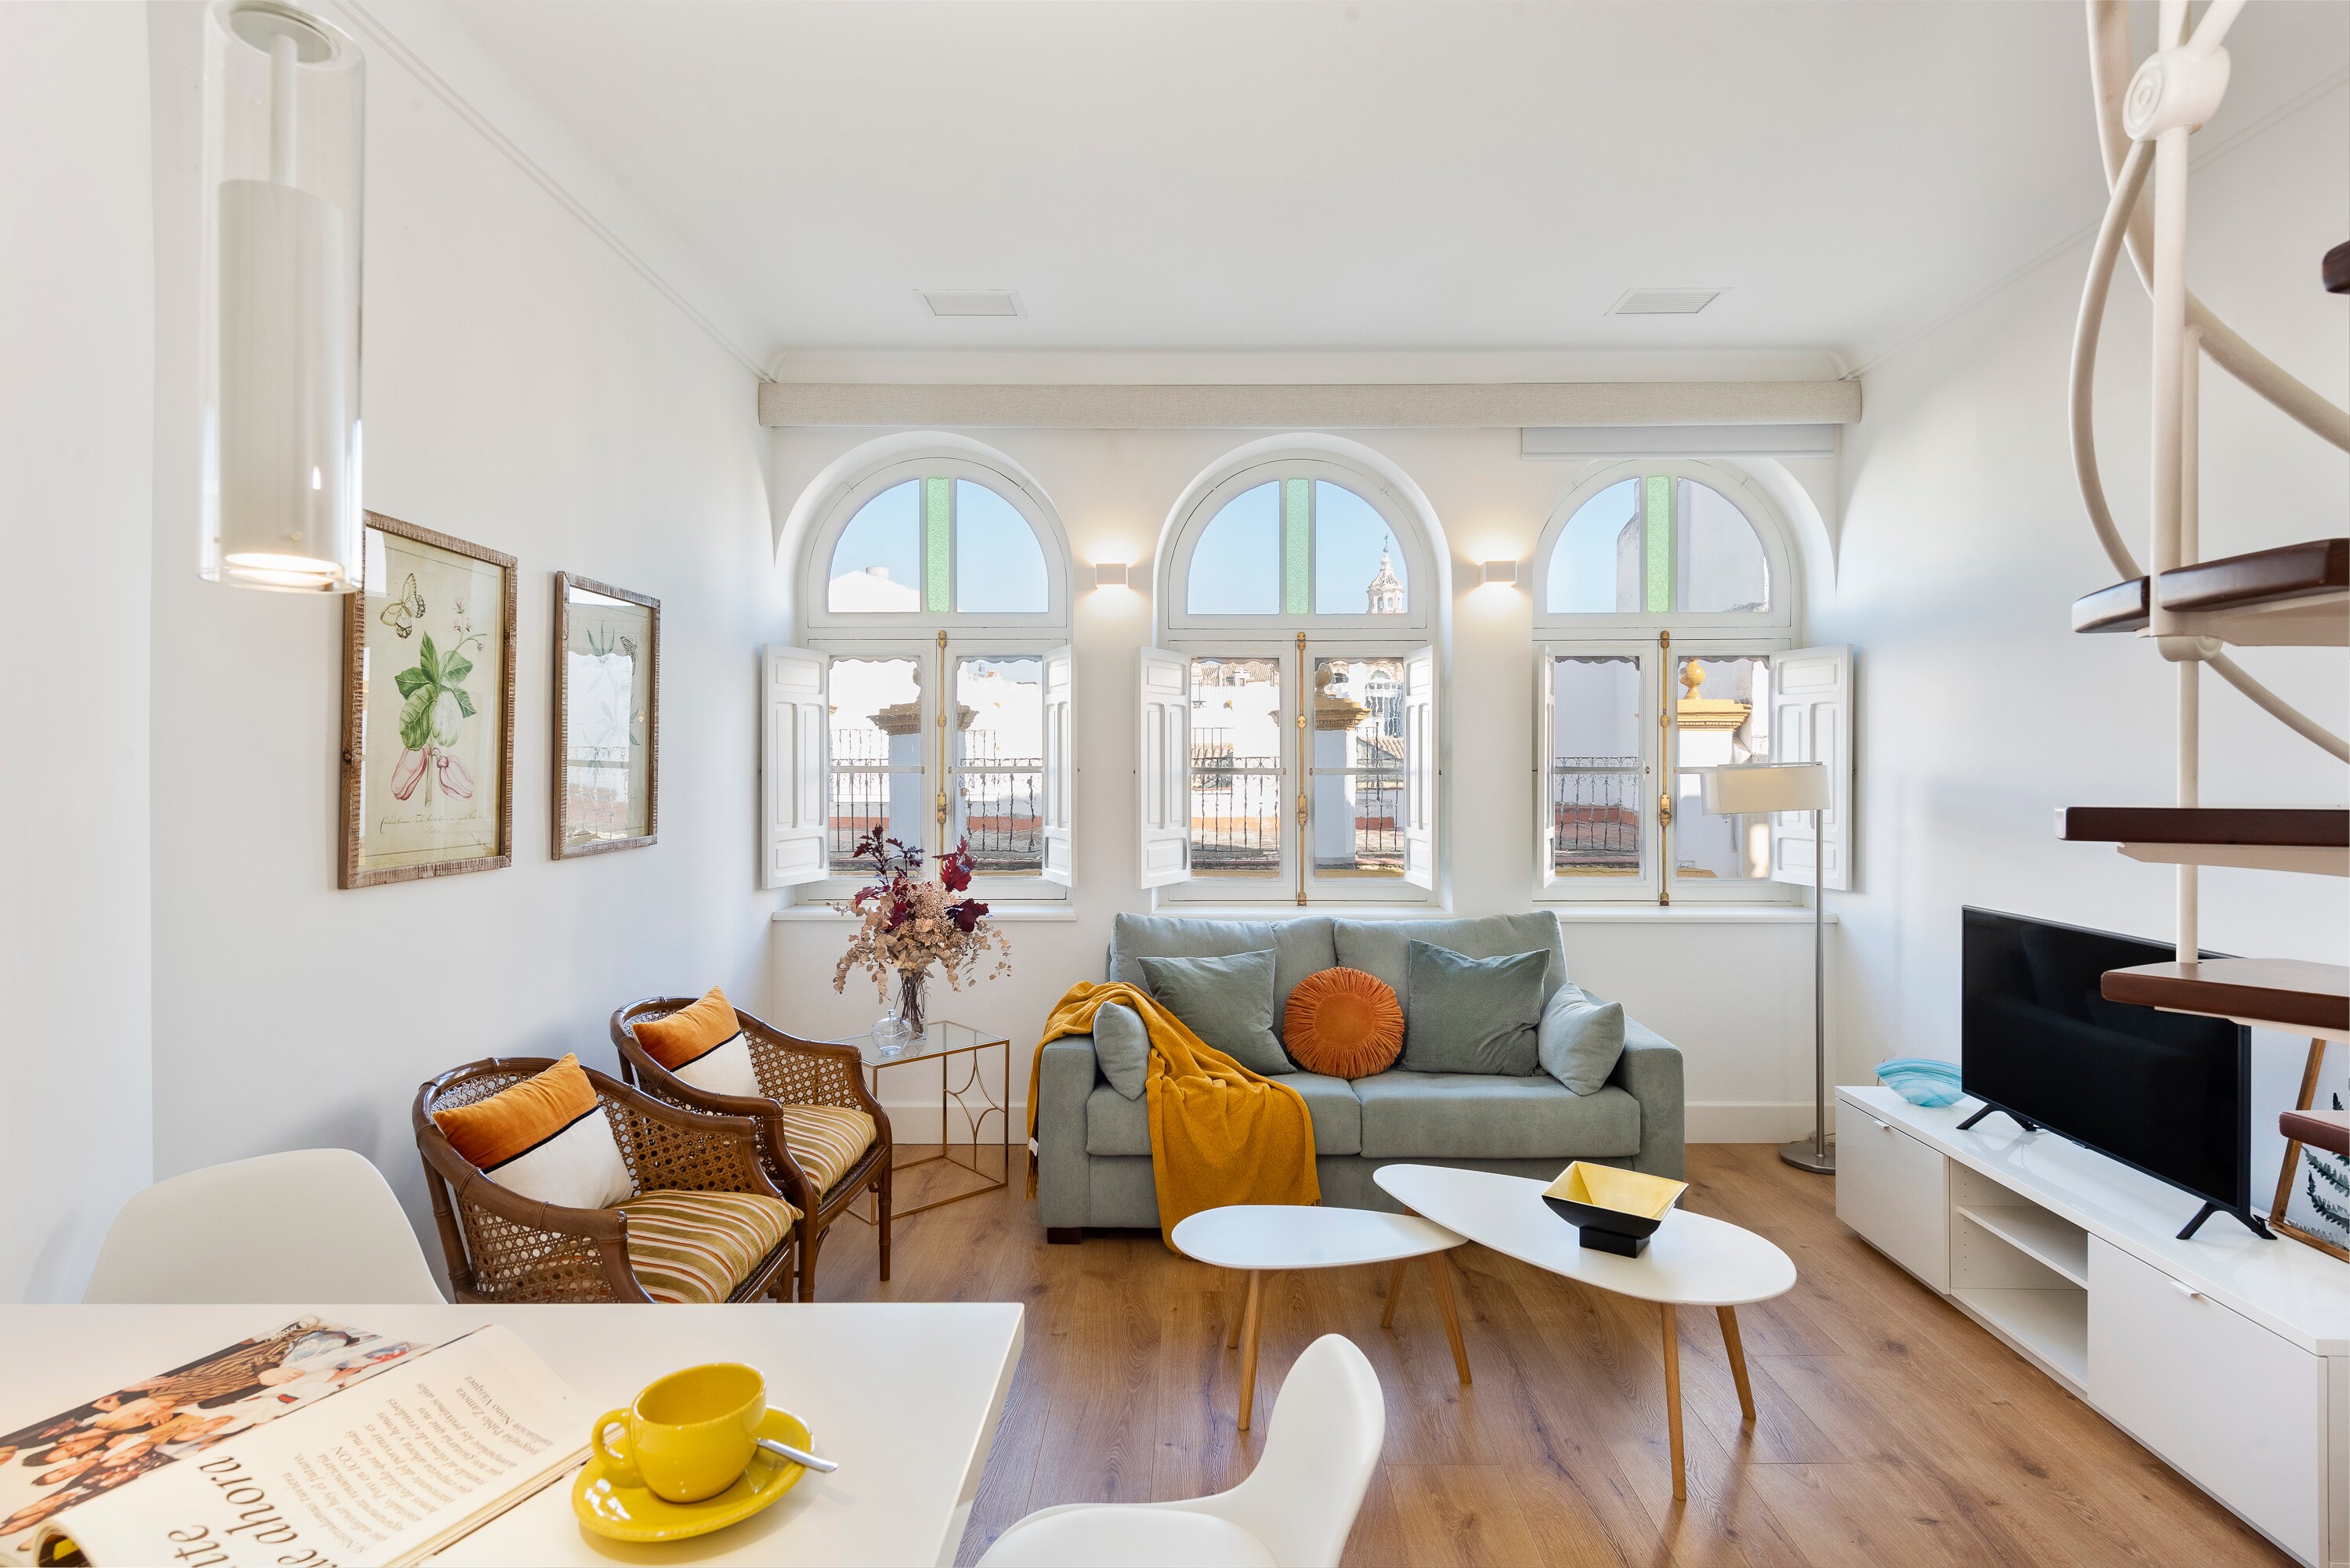 Property Image 2 - Beautiful penthouse located in a classic building in the heart of Seville. Entretejas II 